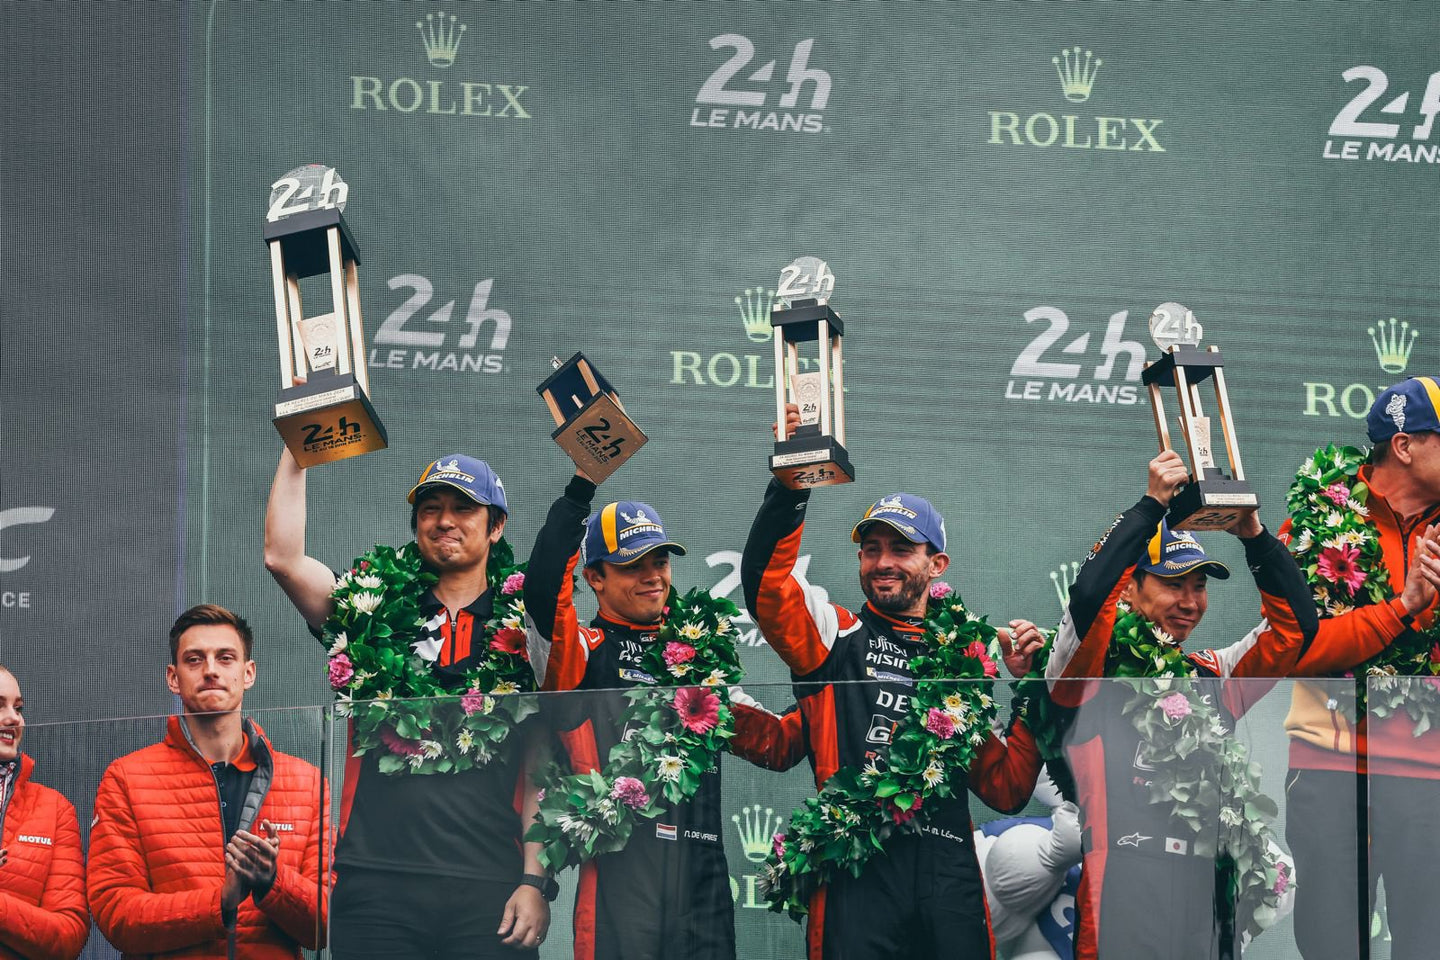 JOSE MARIA LOPEZ, KAMUI KOBAYASHI AND NYCK DE VRIES FIGHT FOR 24H OF LE MANS WORLD ENDURANCE CHAMPIONSHIP VICTORY IN FRANCE